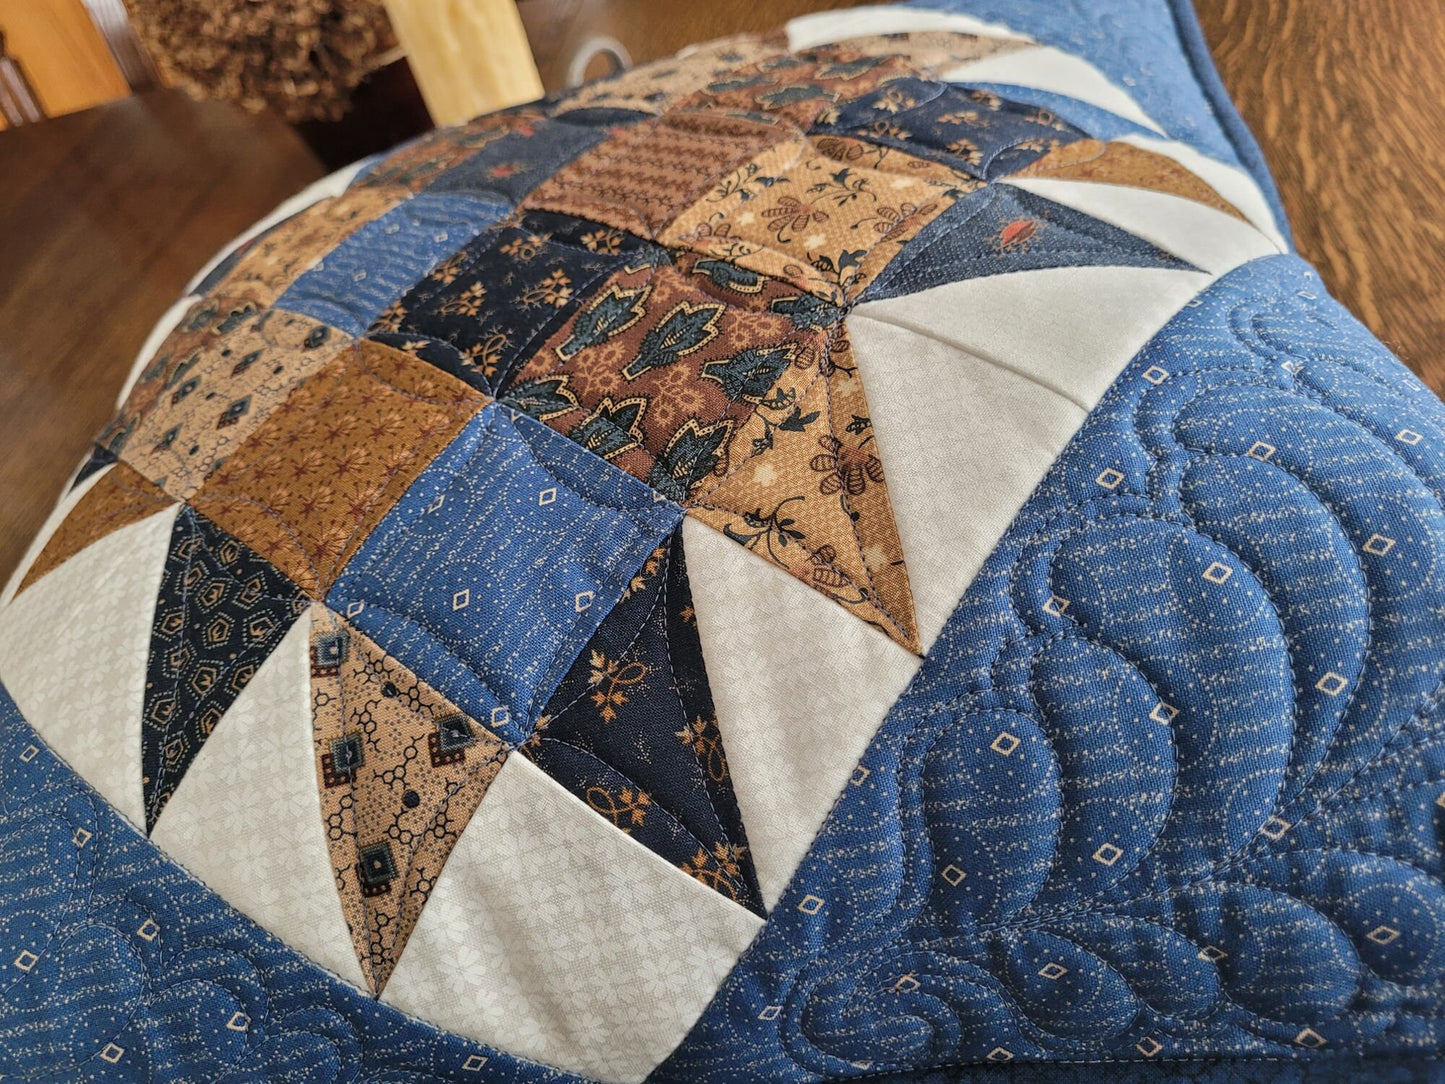 quilted pillow